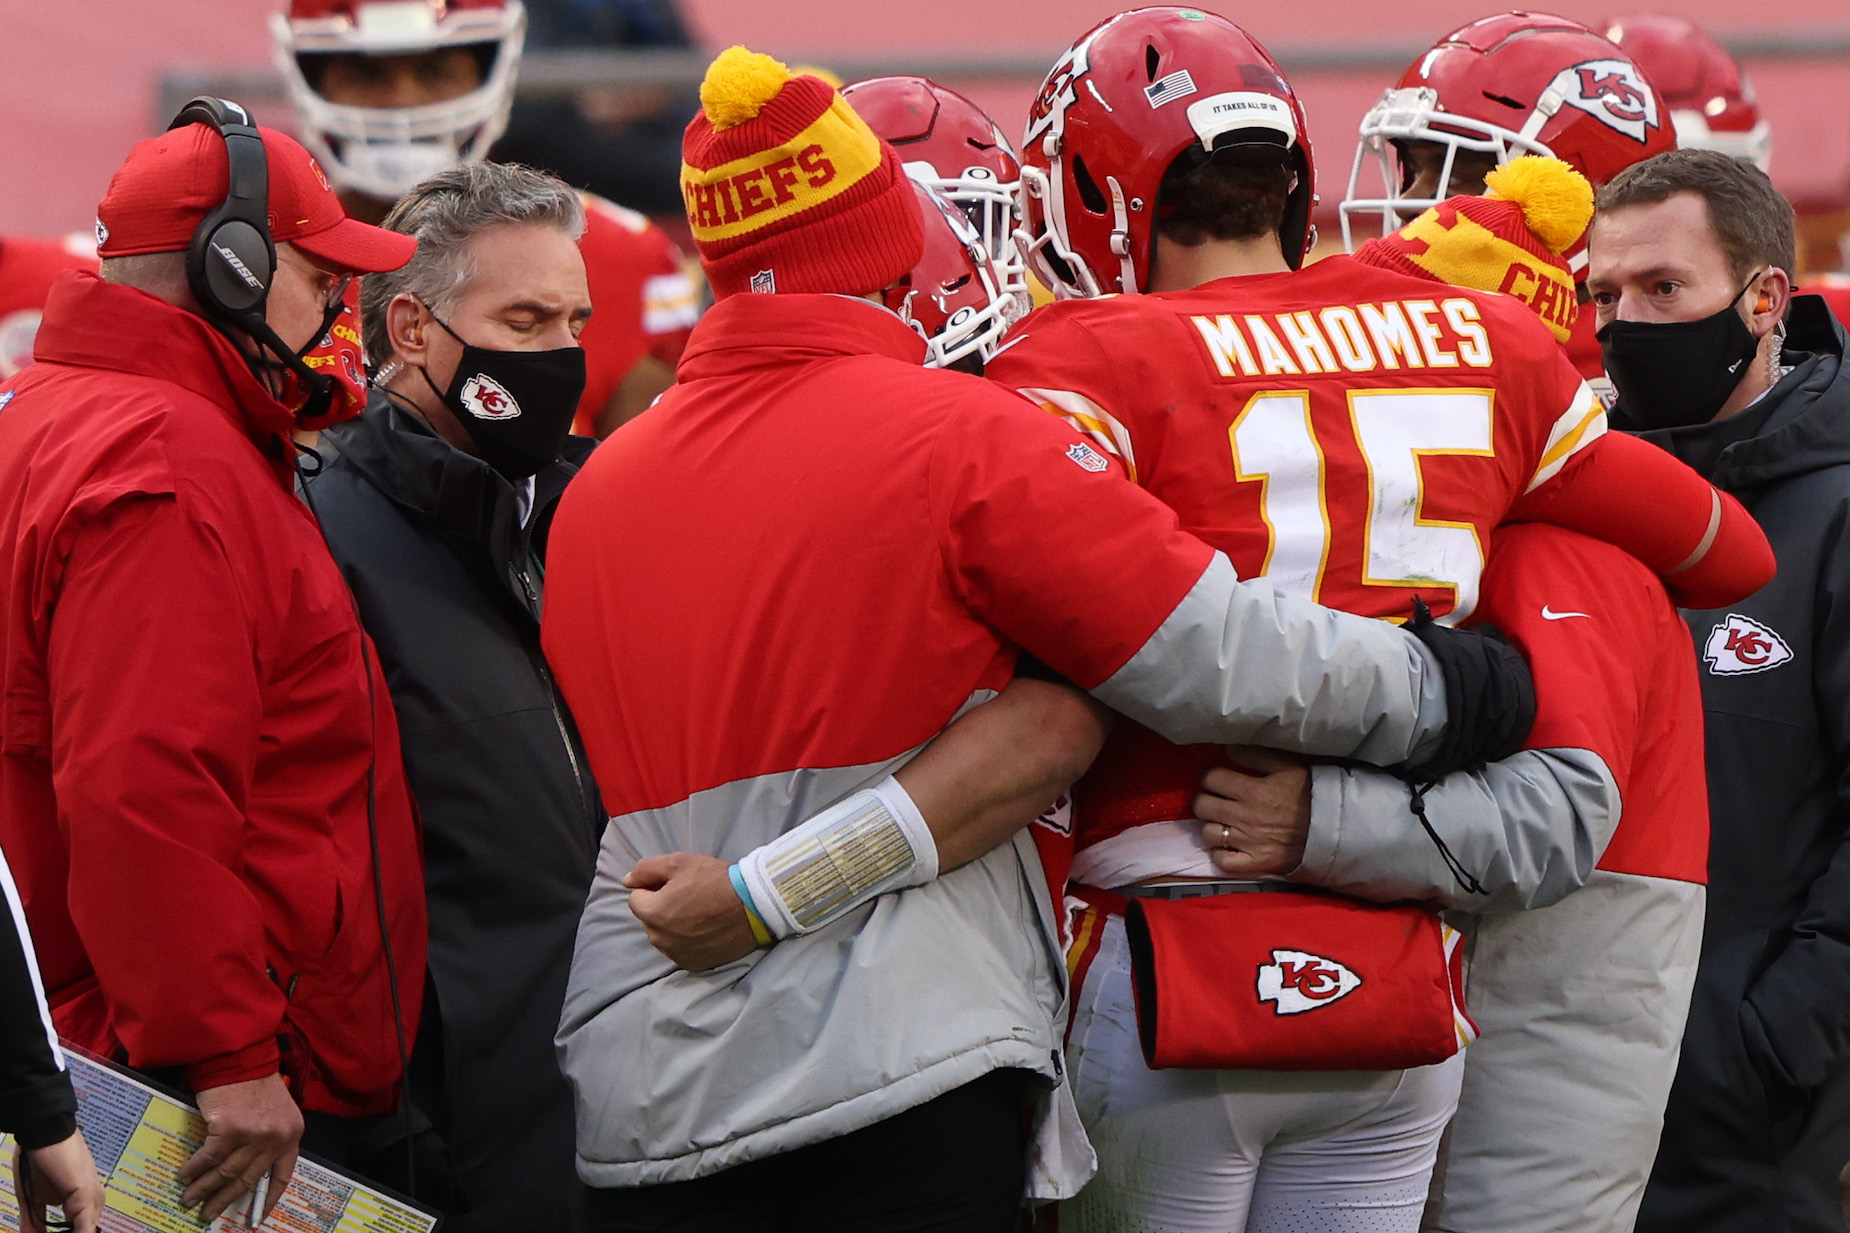 Patrick Mahomes has cleared concussion protocol, but the Kansas City Chiefs quarterback still has a nagging injury ahead of the AFC Championship.